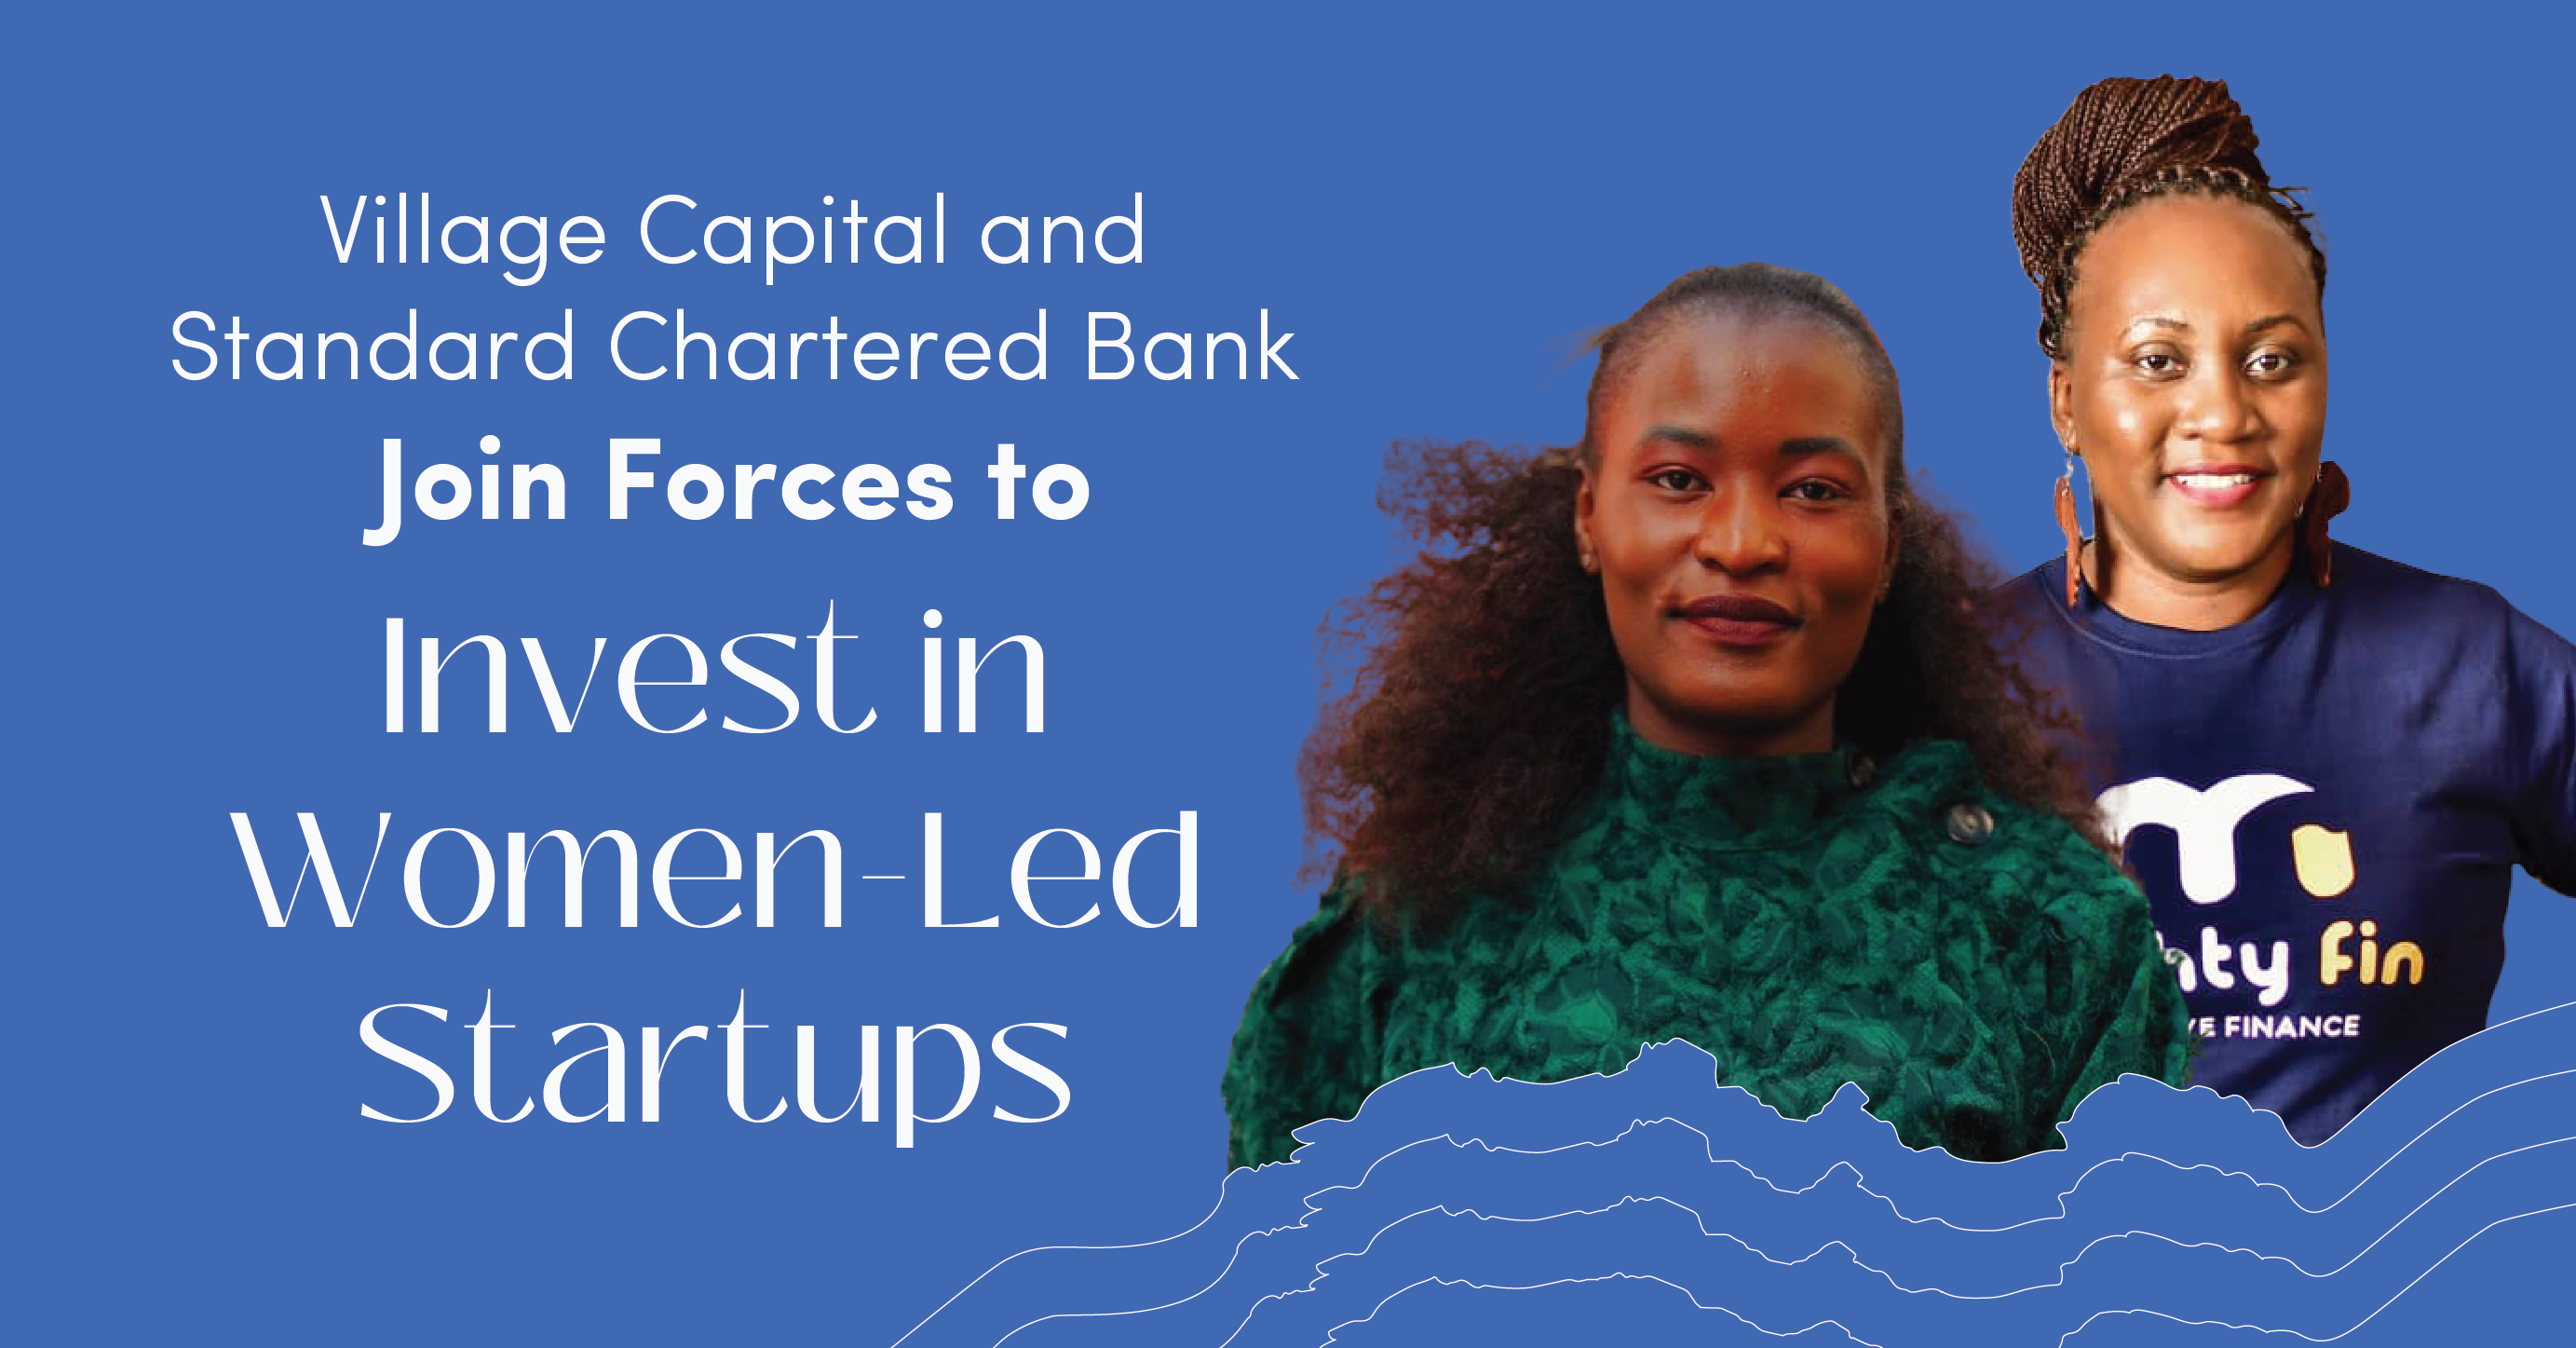 Village Capital and Standard Chartered Bank Join Forces to Invest in Women-Led Startups